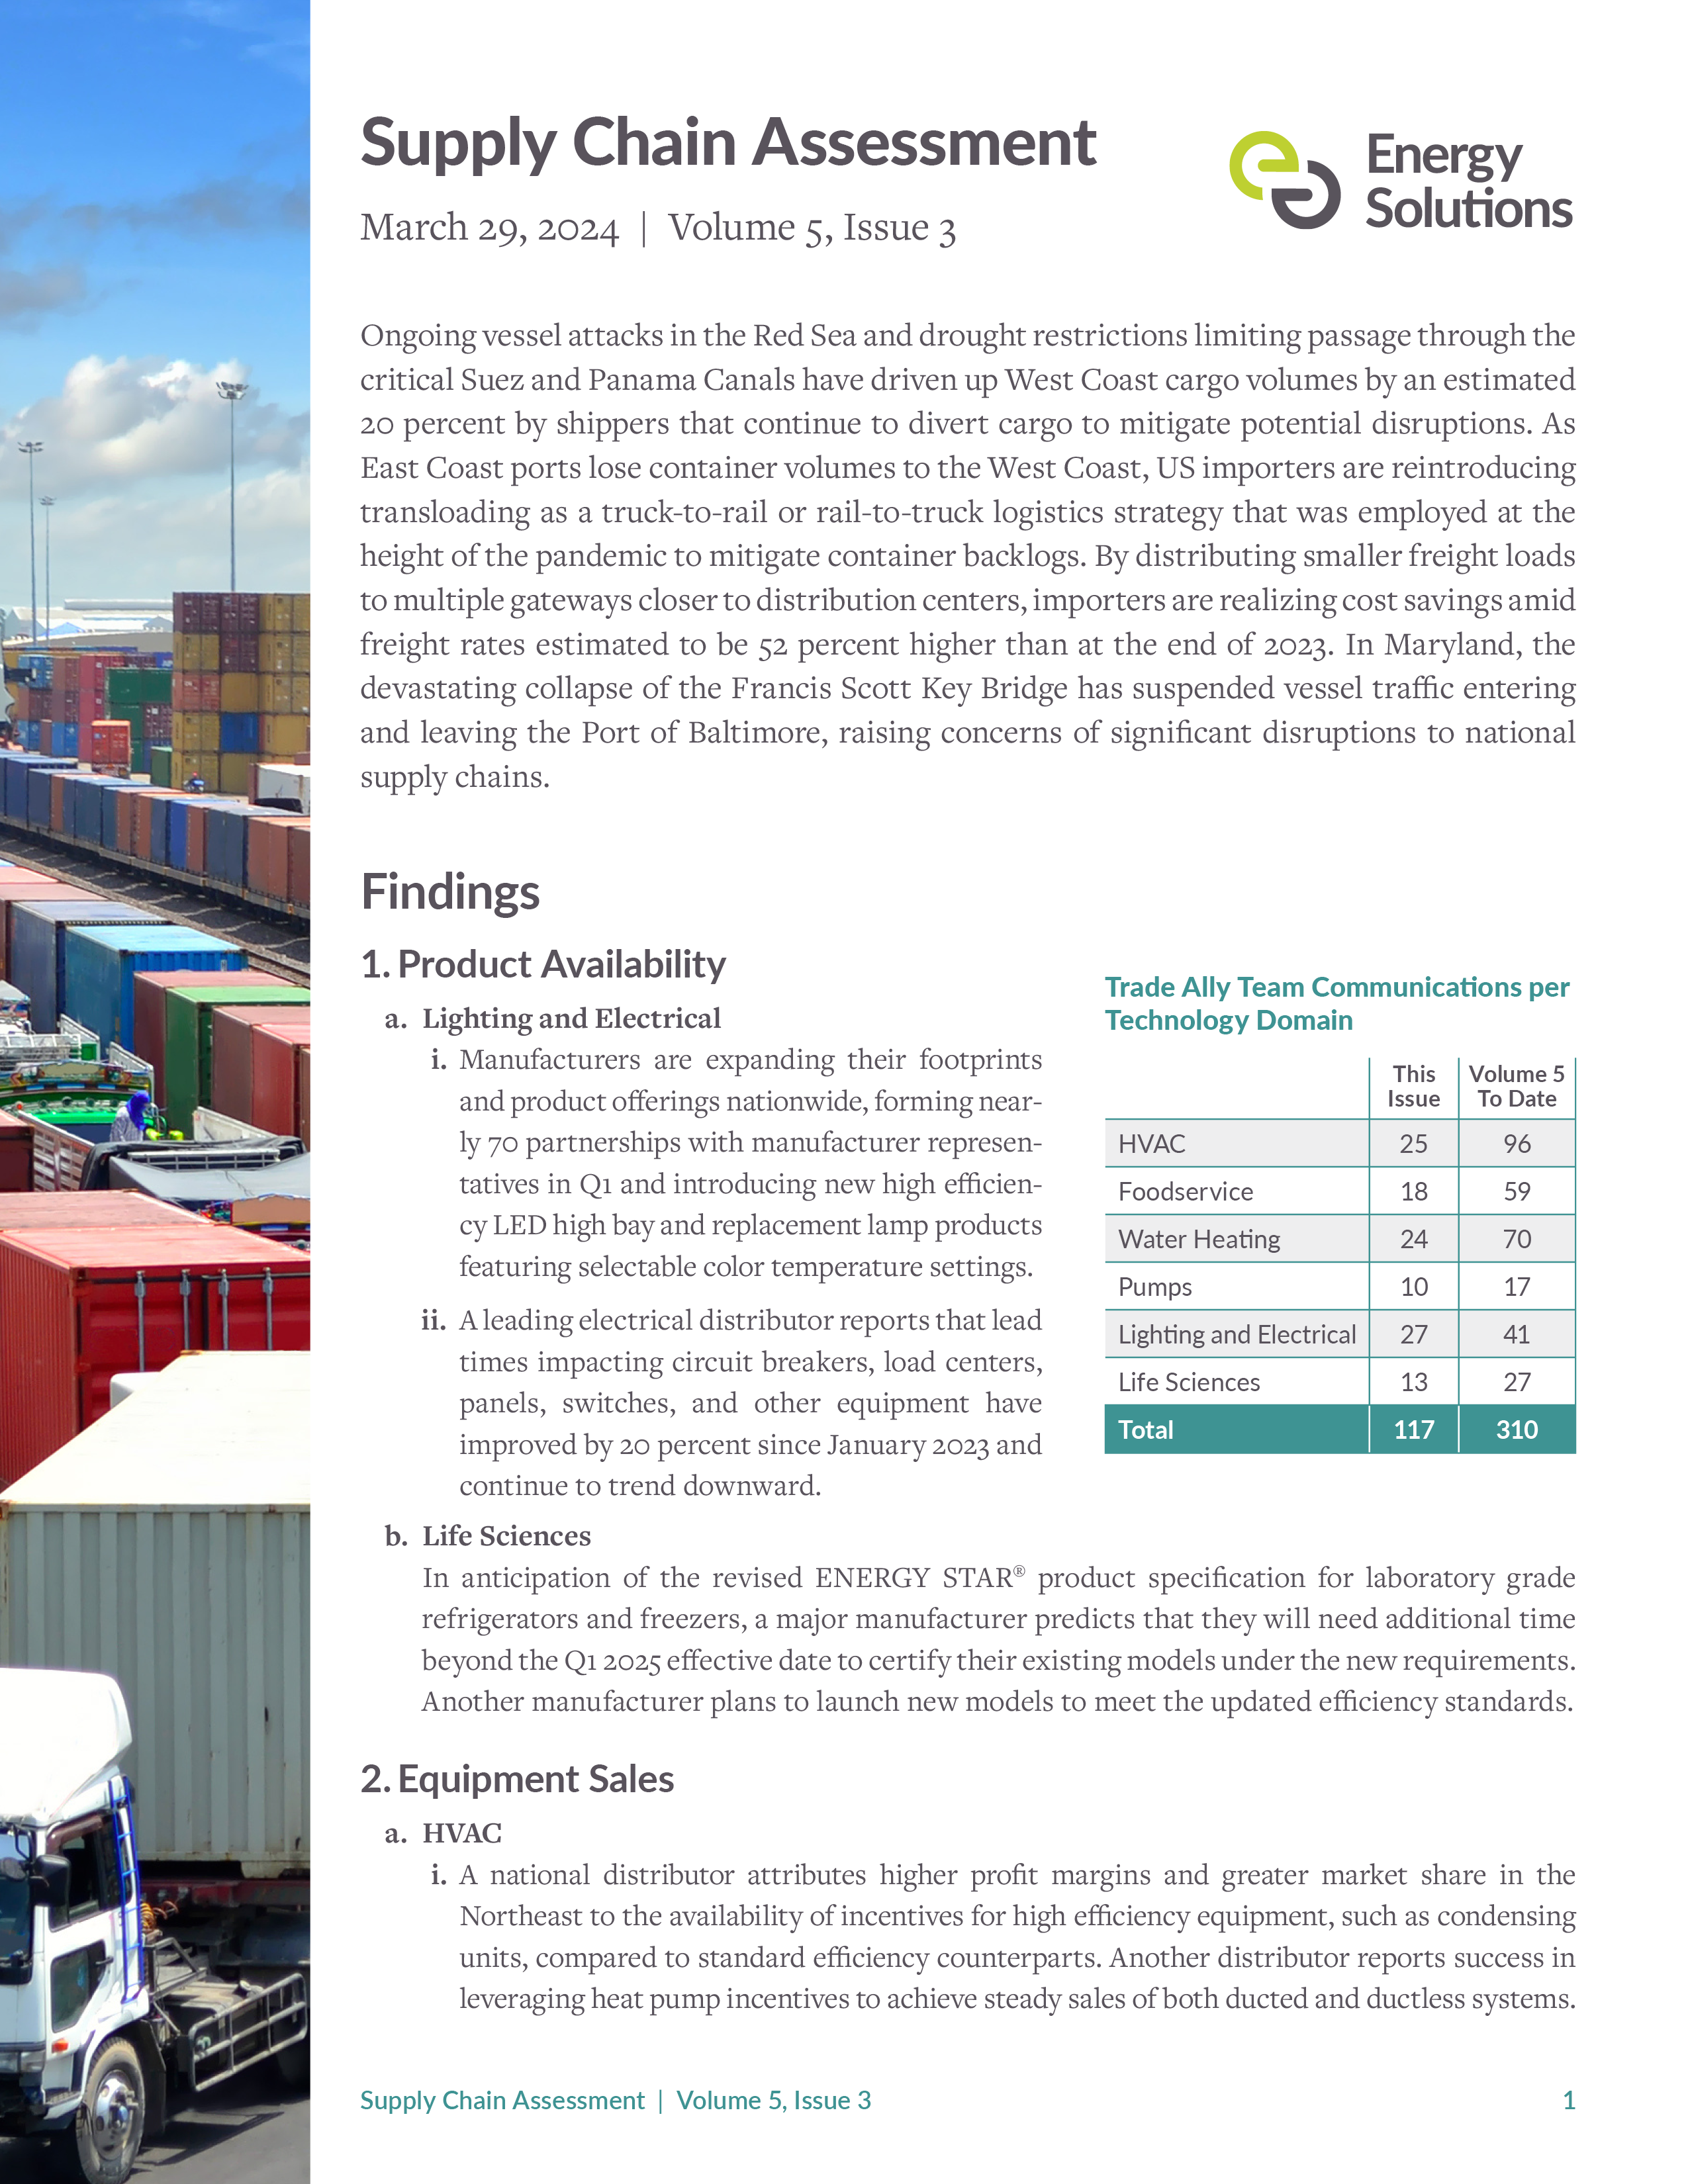 Supply Chain Assessment Vol 5 Issue 3